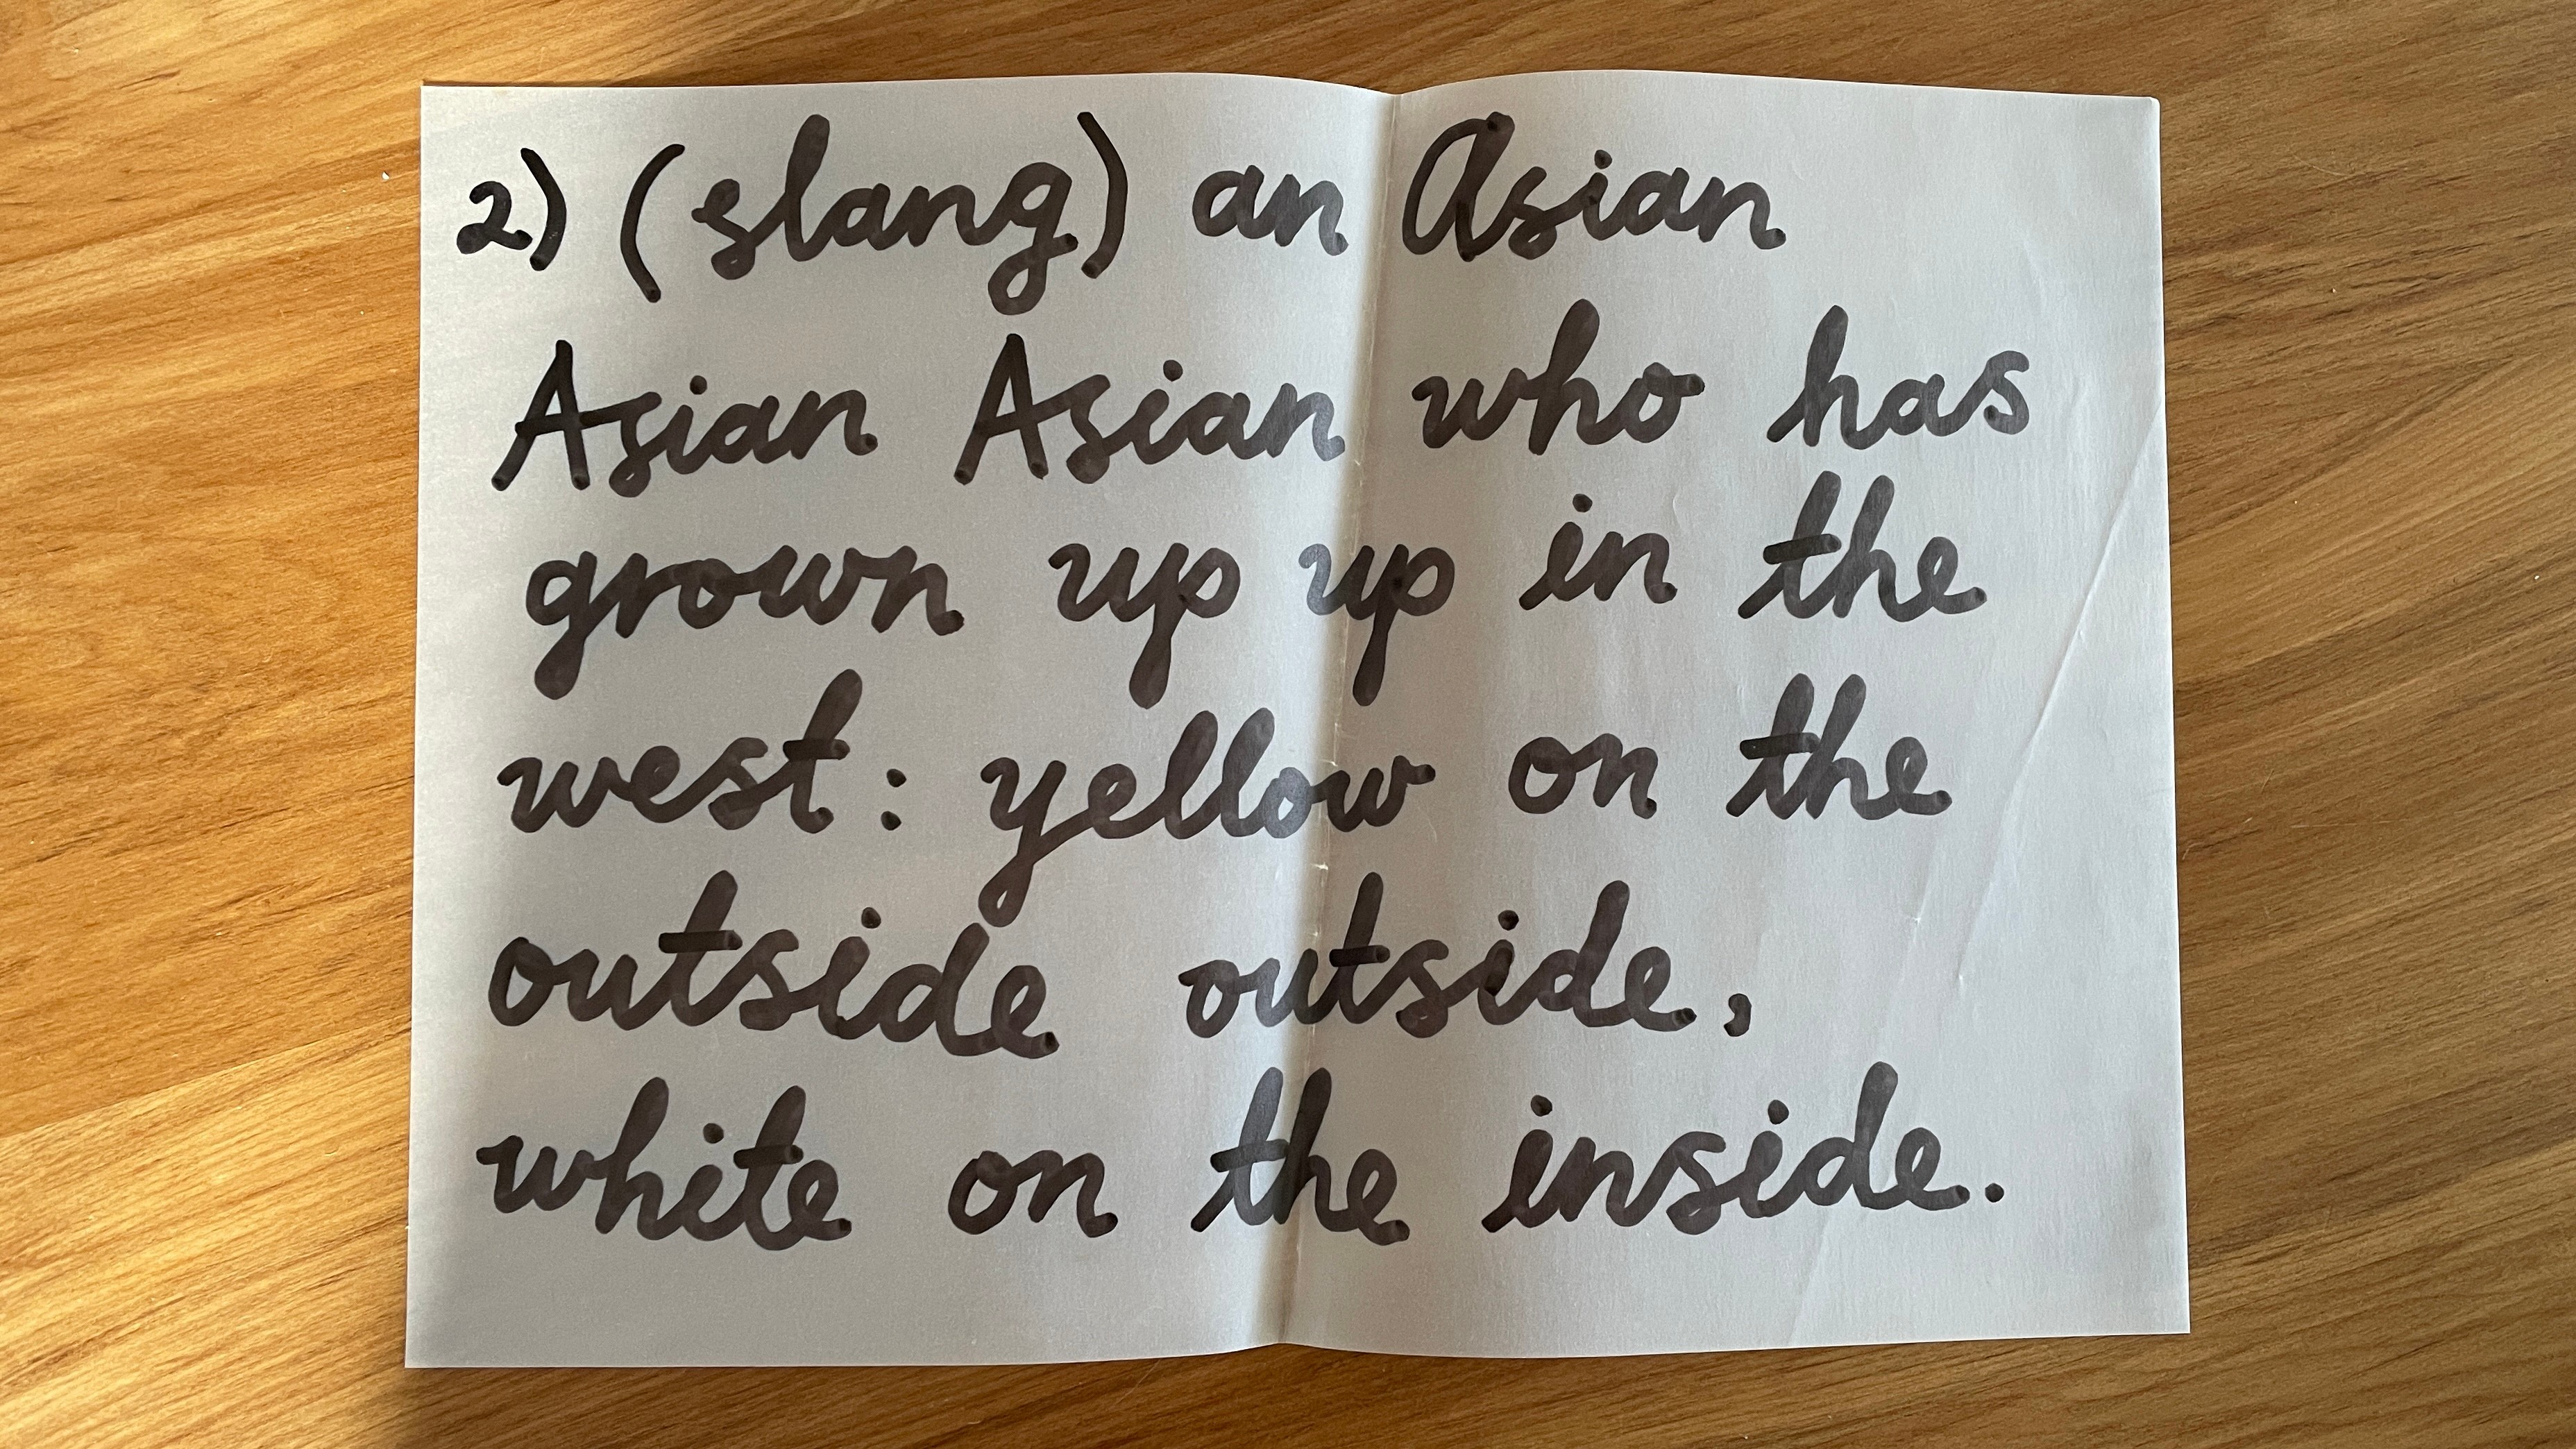 A piece of paper with the following handwriting: “2) (slang) an Asian Asian Asian who has grown up up in the west: yellow on the outside outside, white on the inside.”